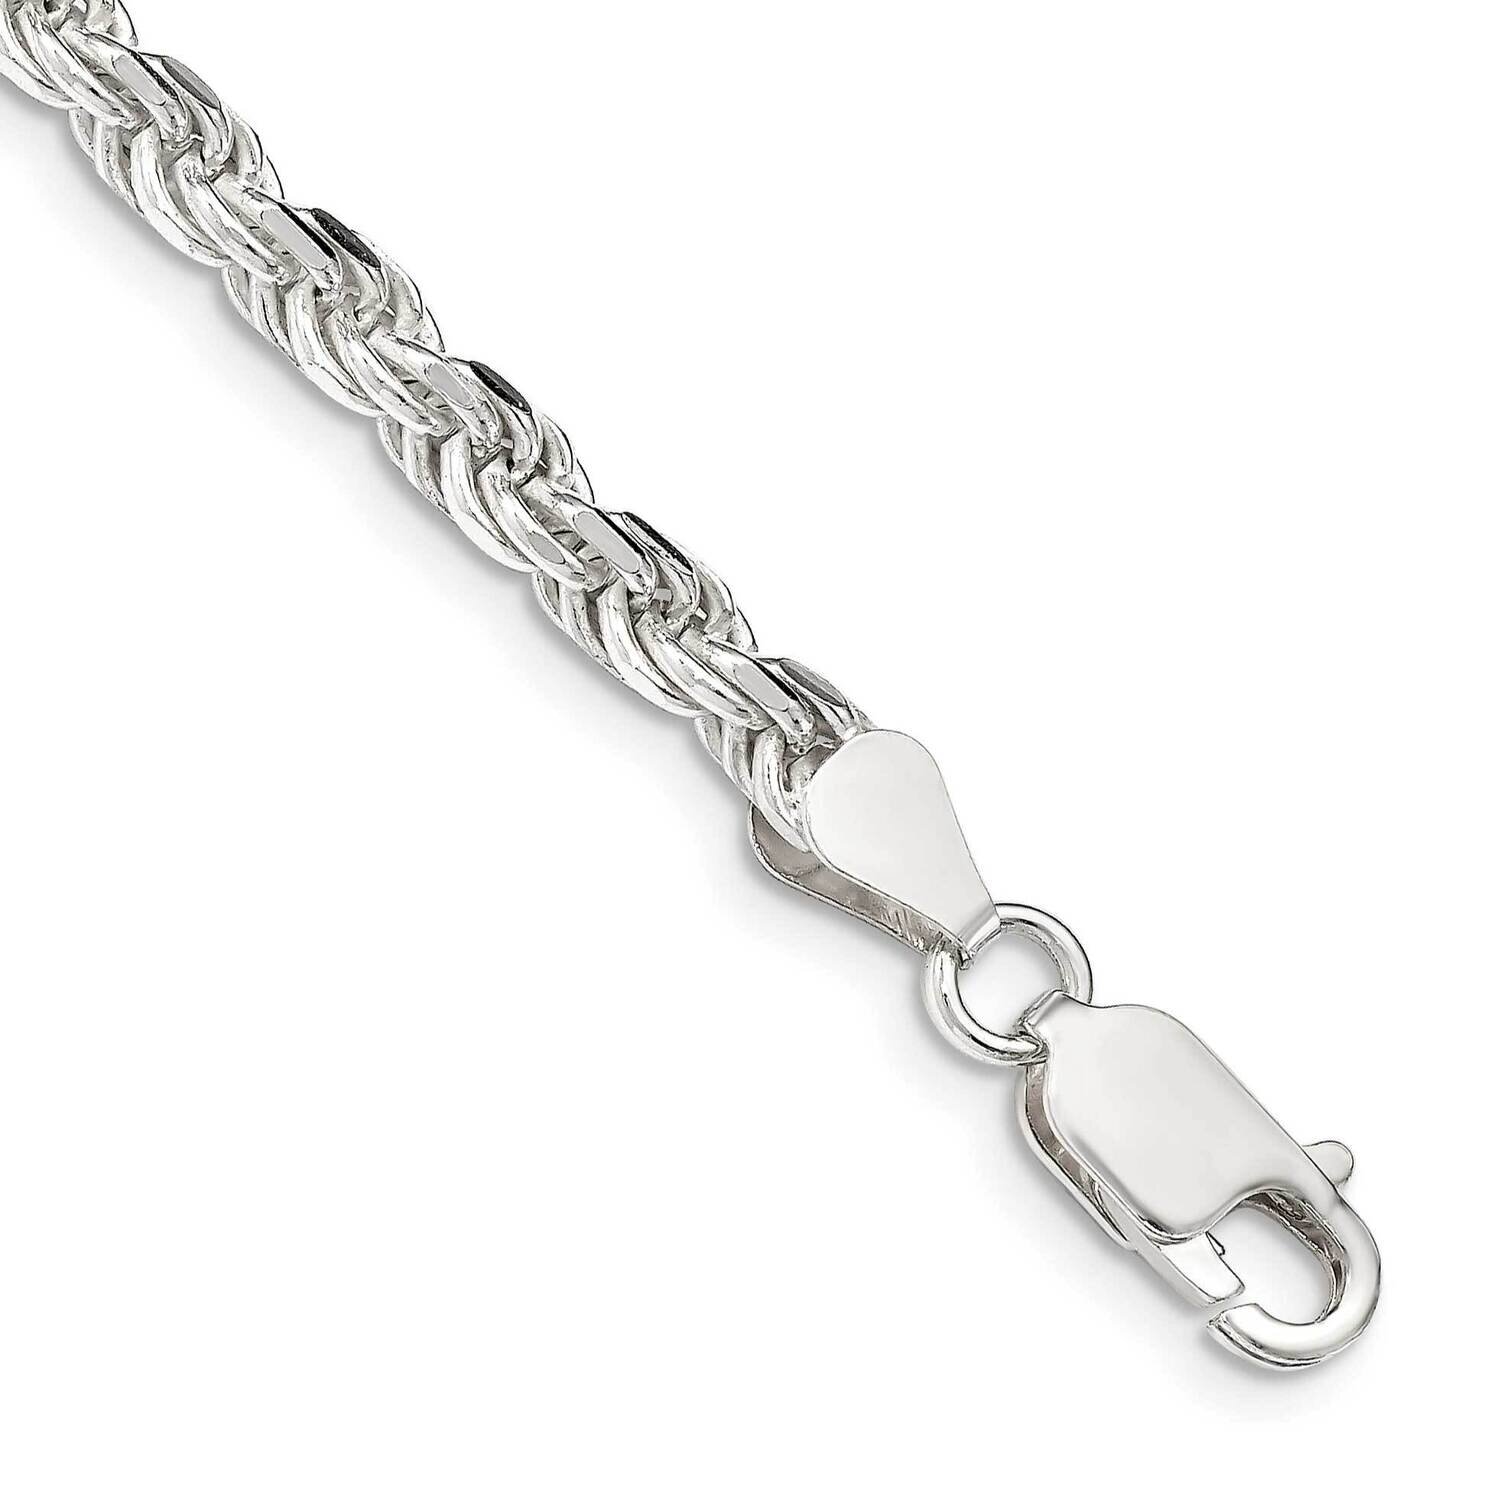 4.25mm Diamond-Cut Rope Chain 7 Inch Sterling Silver QDC090-7